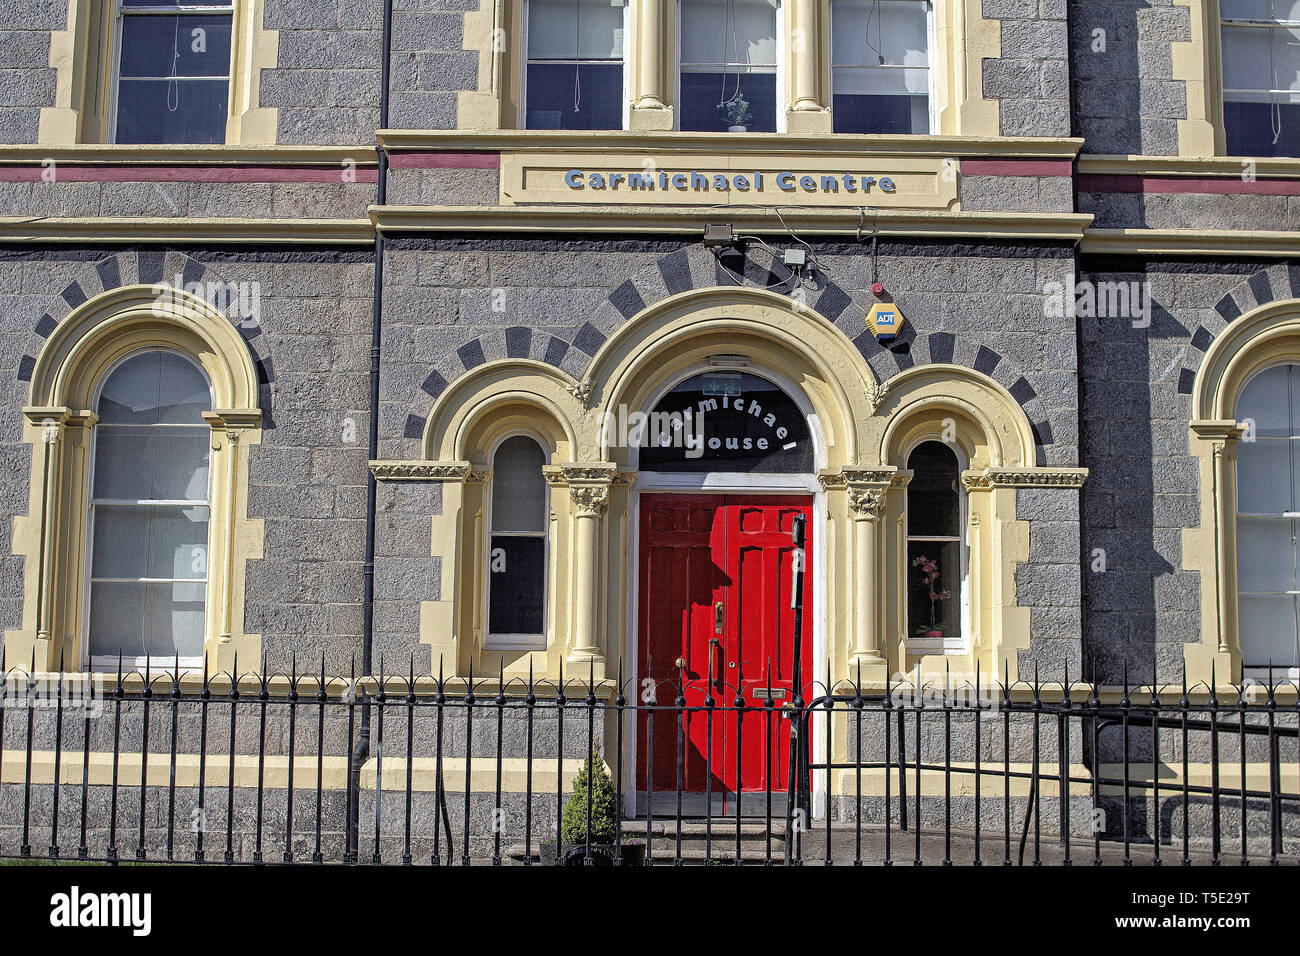 The Carmichael Centre in North Brunswick Street. Built in 1864 as a medical school it is now a training centre for non profits. Stock Photo